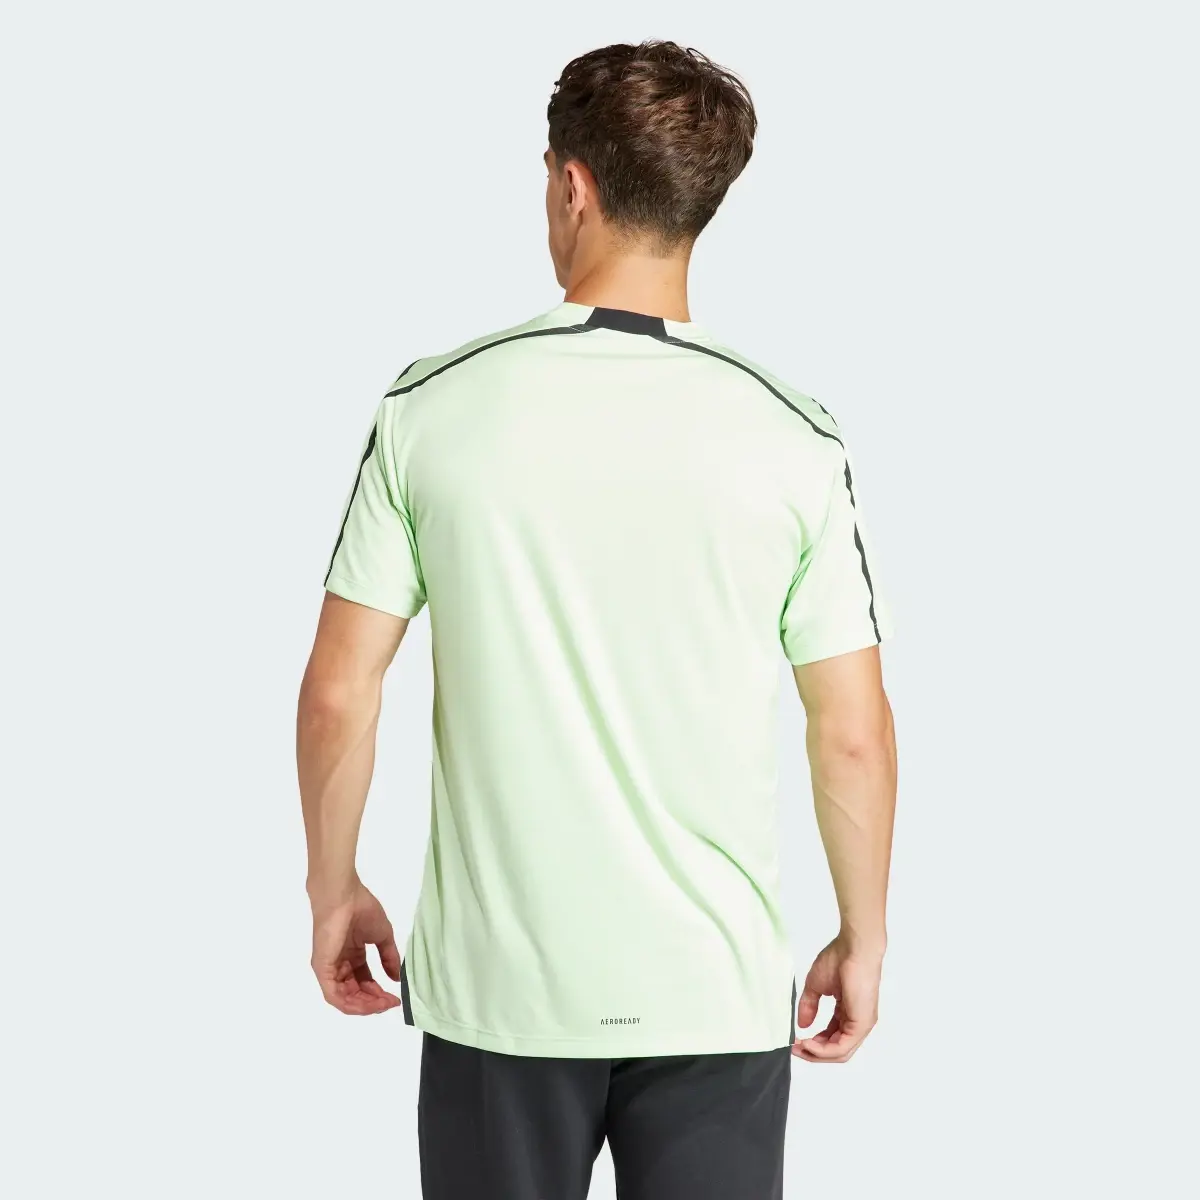 Adidas Designed for Training Adistrong Workout Tee. 3